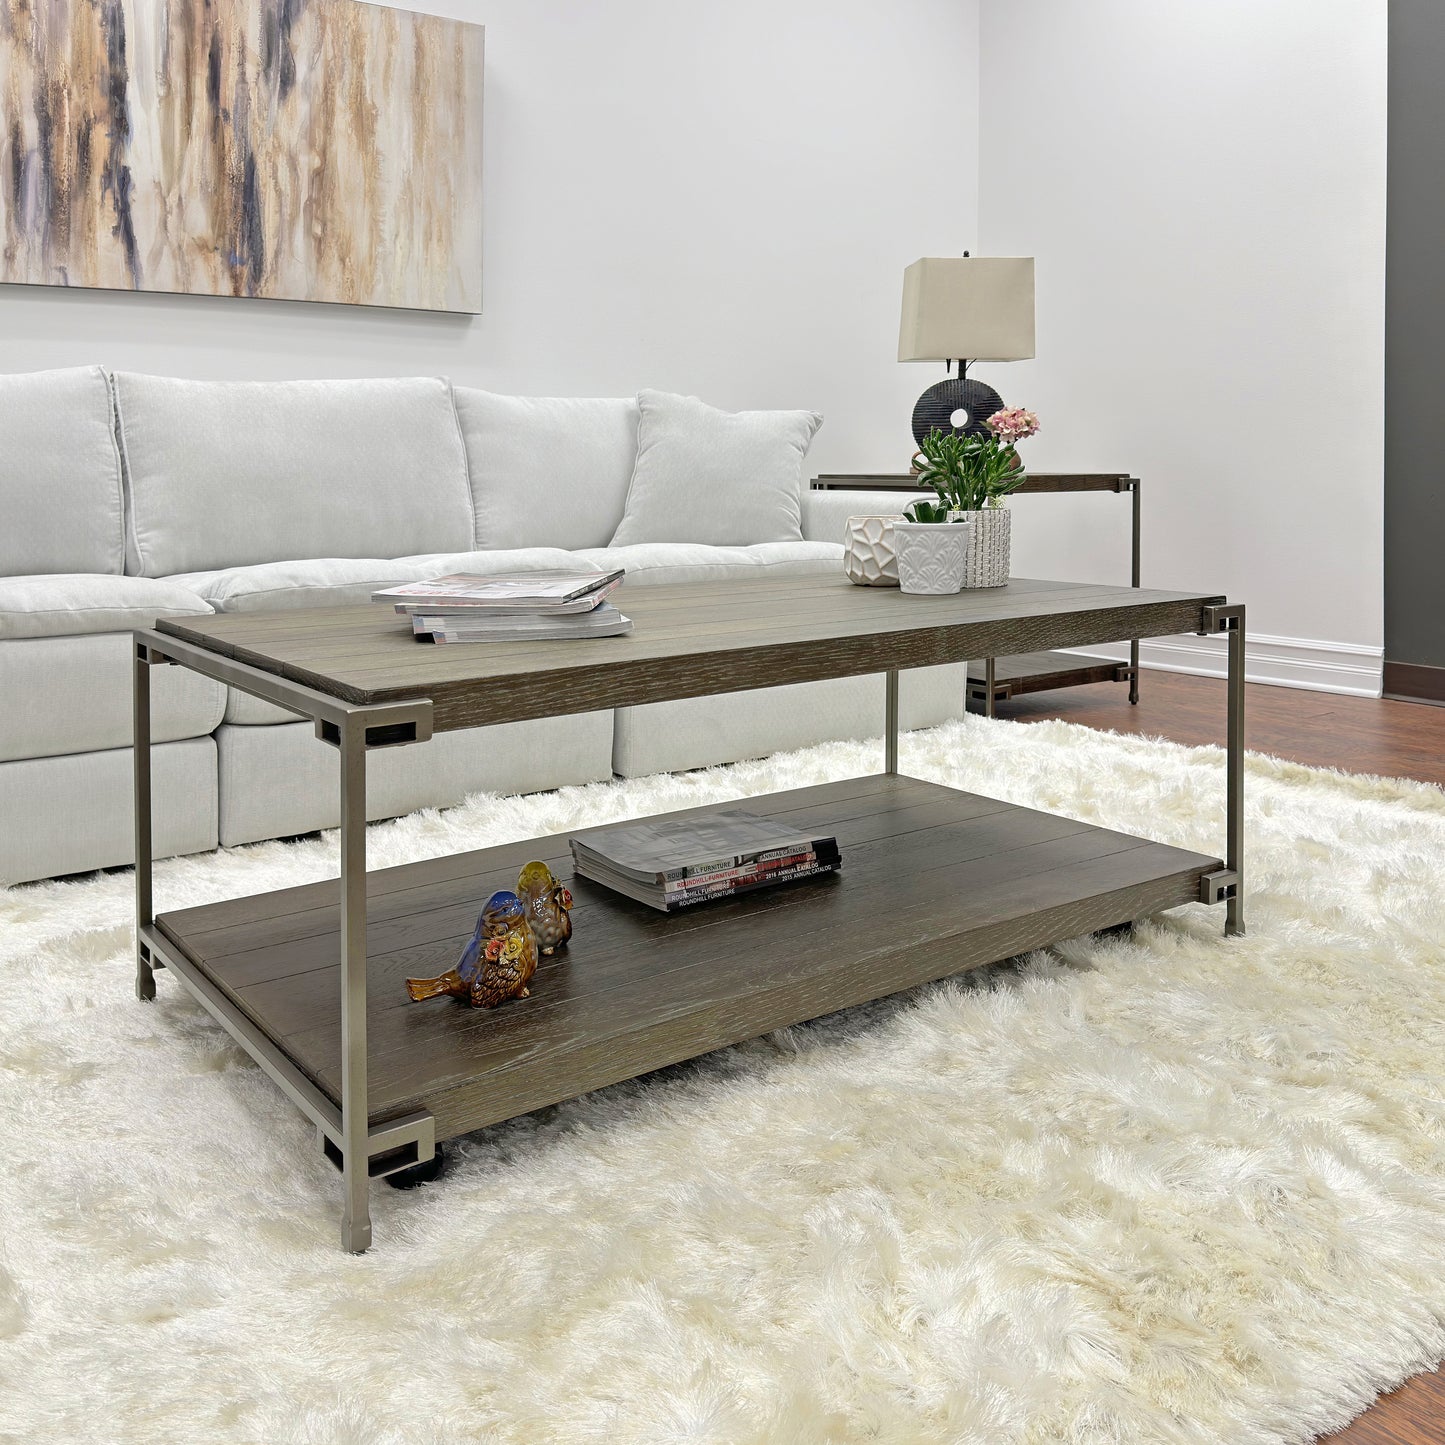 Roundhill Furniture Corbeta Metal Frame Wood Living Room Coffee Table with Casters